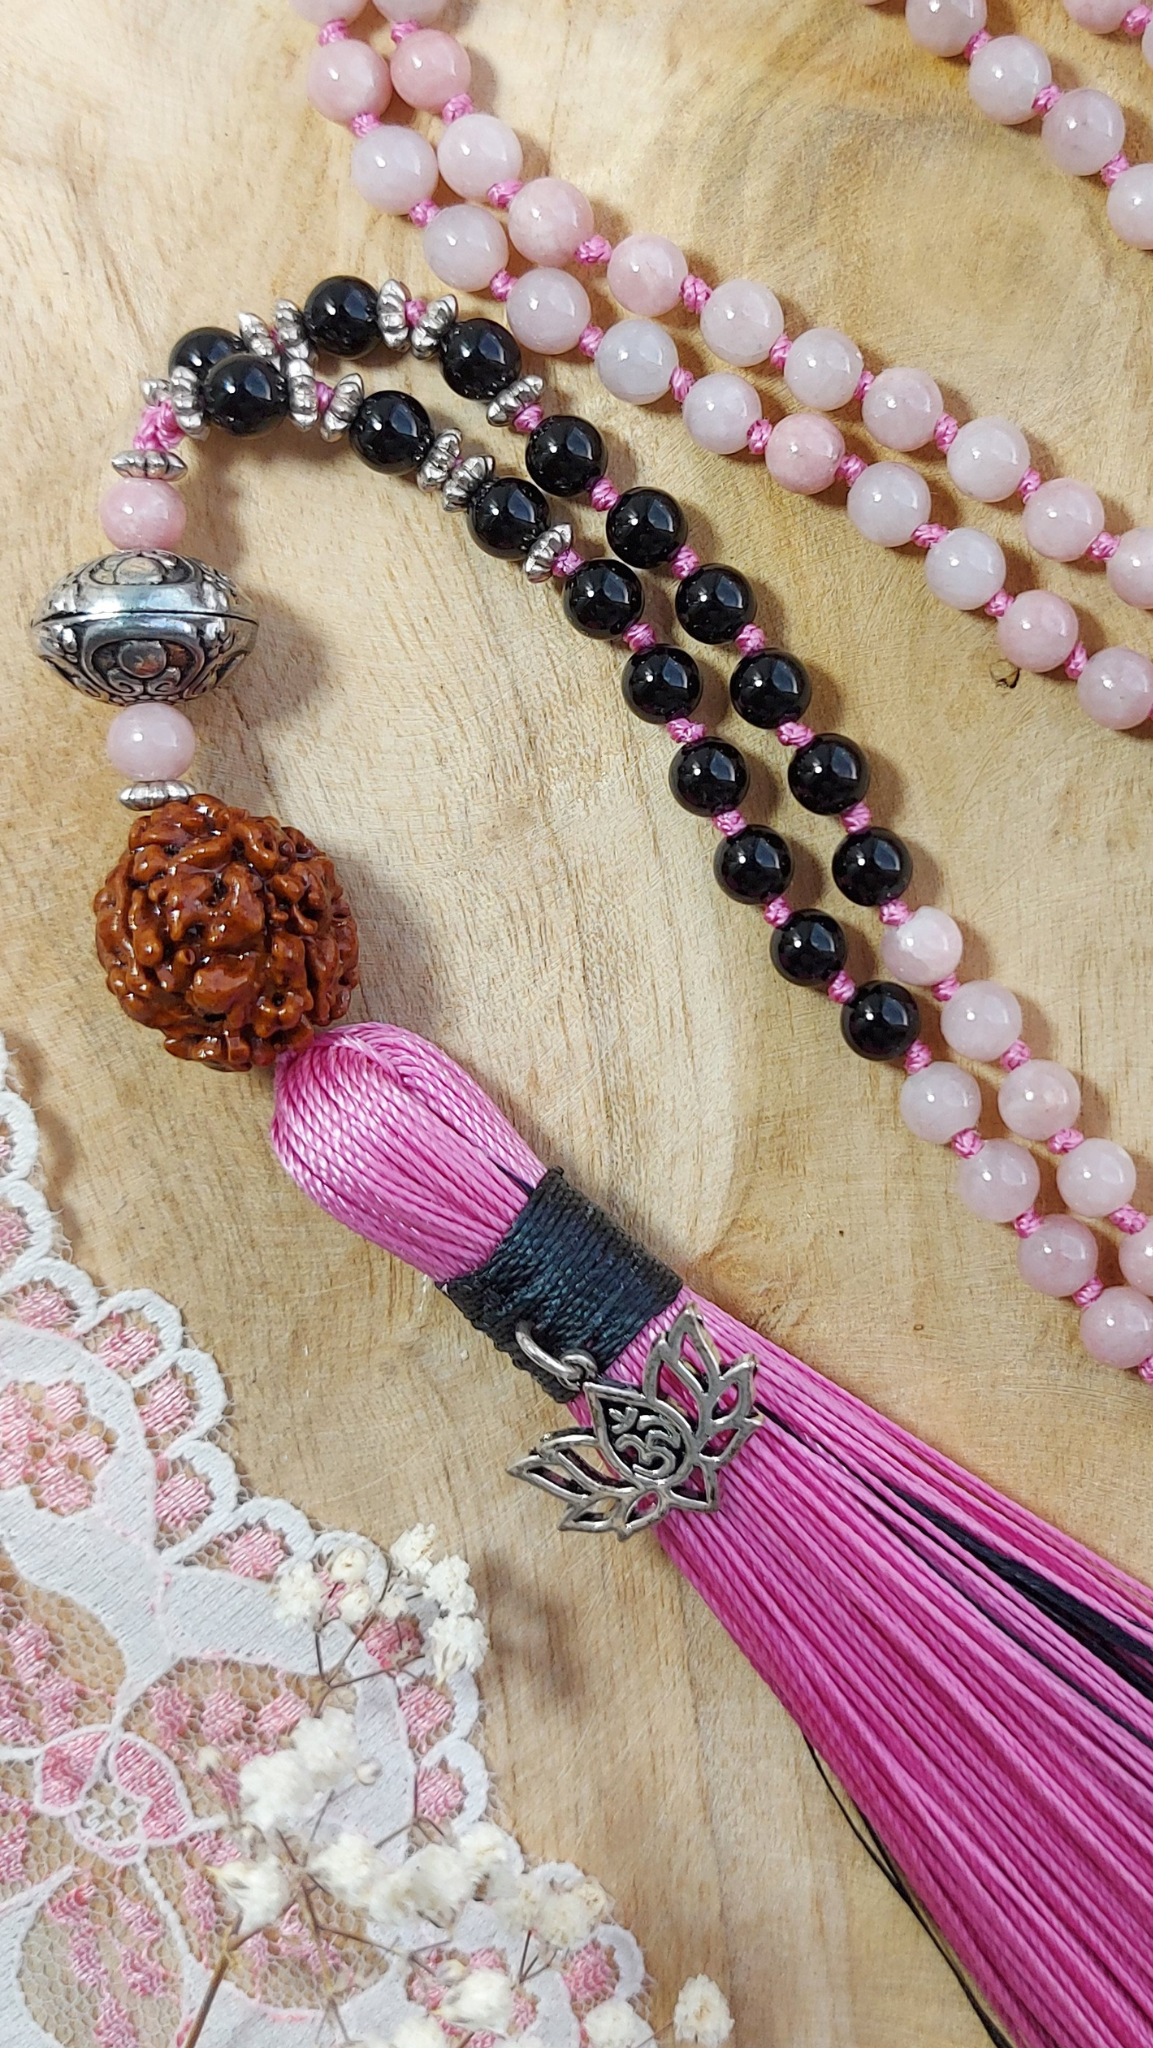 PEACEFUL POWER Mala Meditation Necklace with Pink Agate and Black Onyx